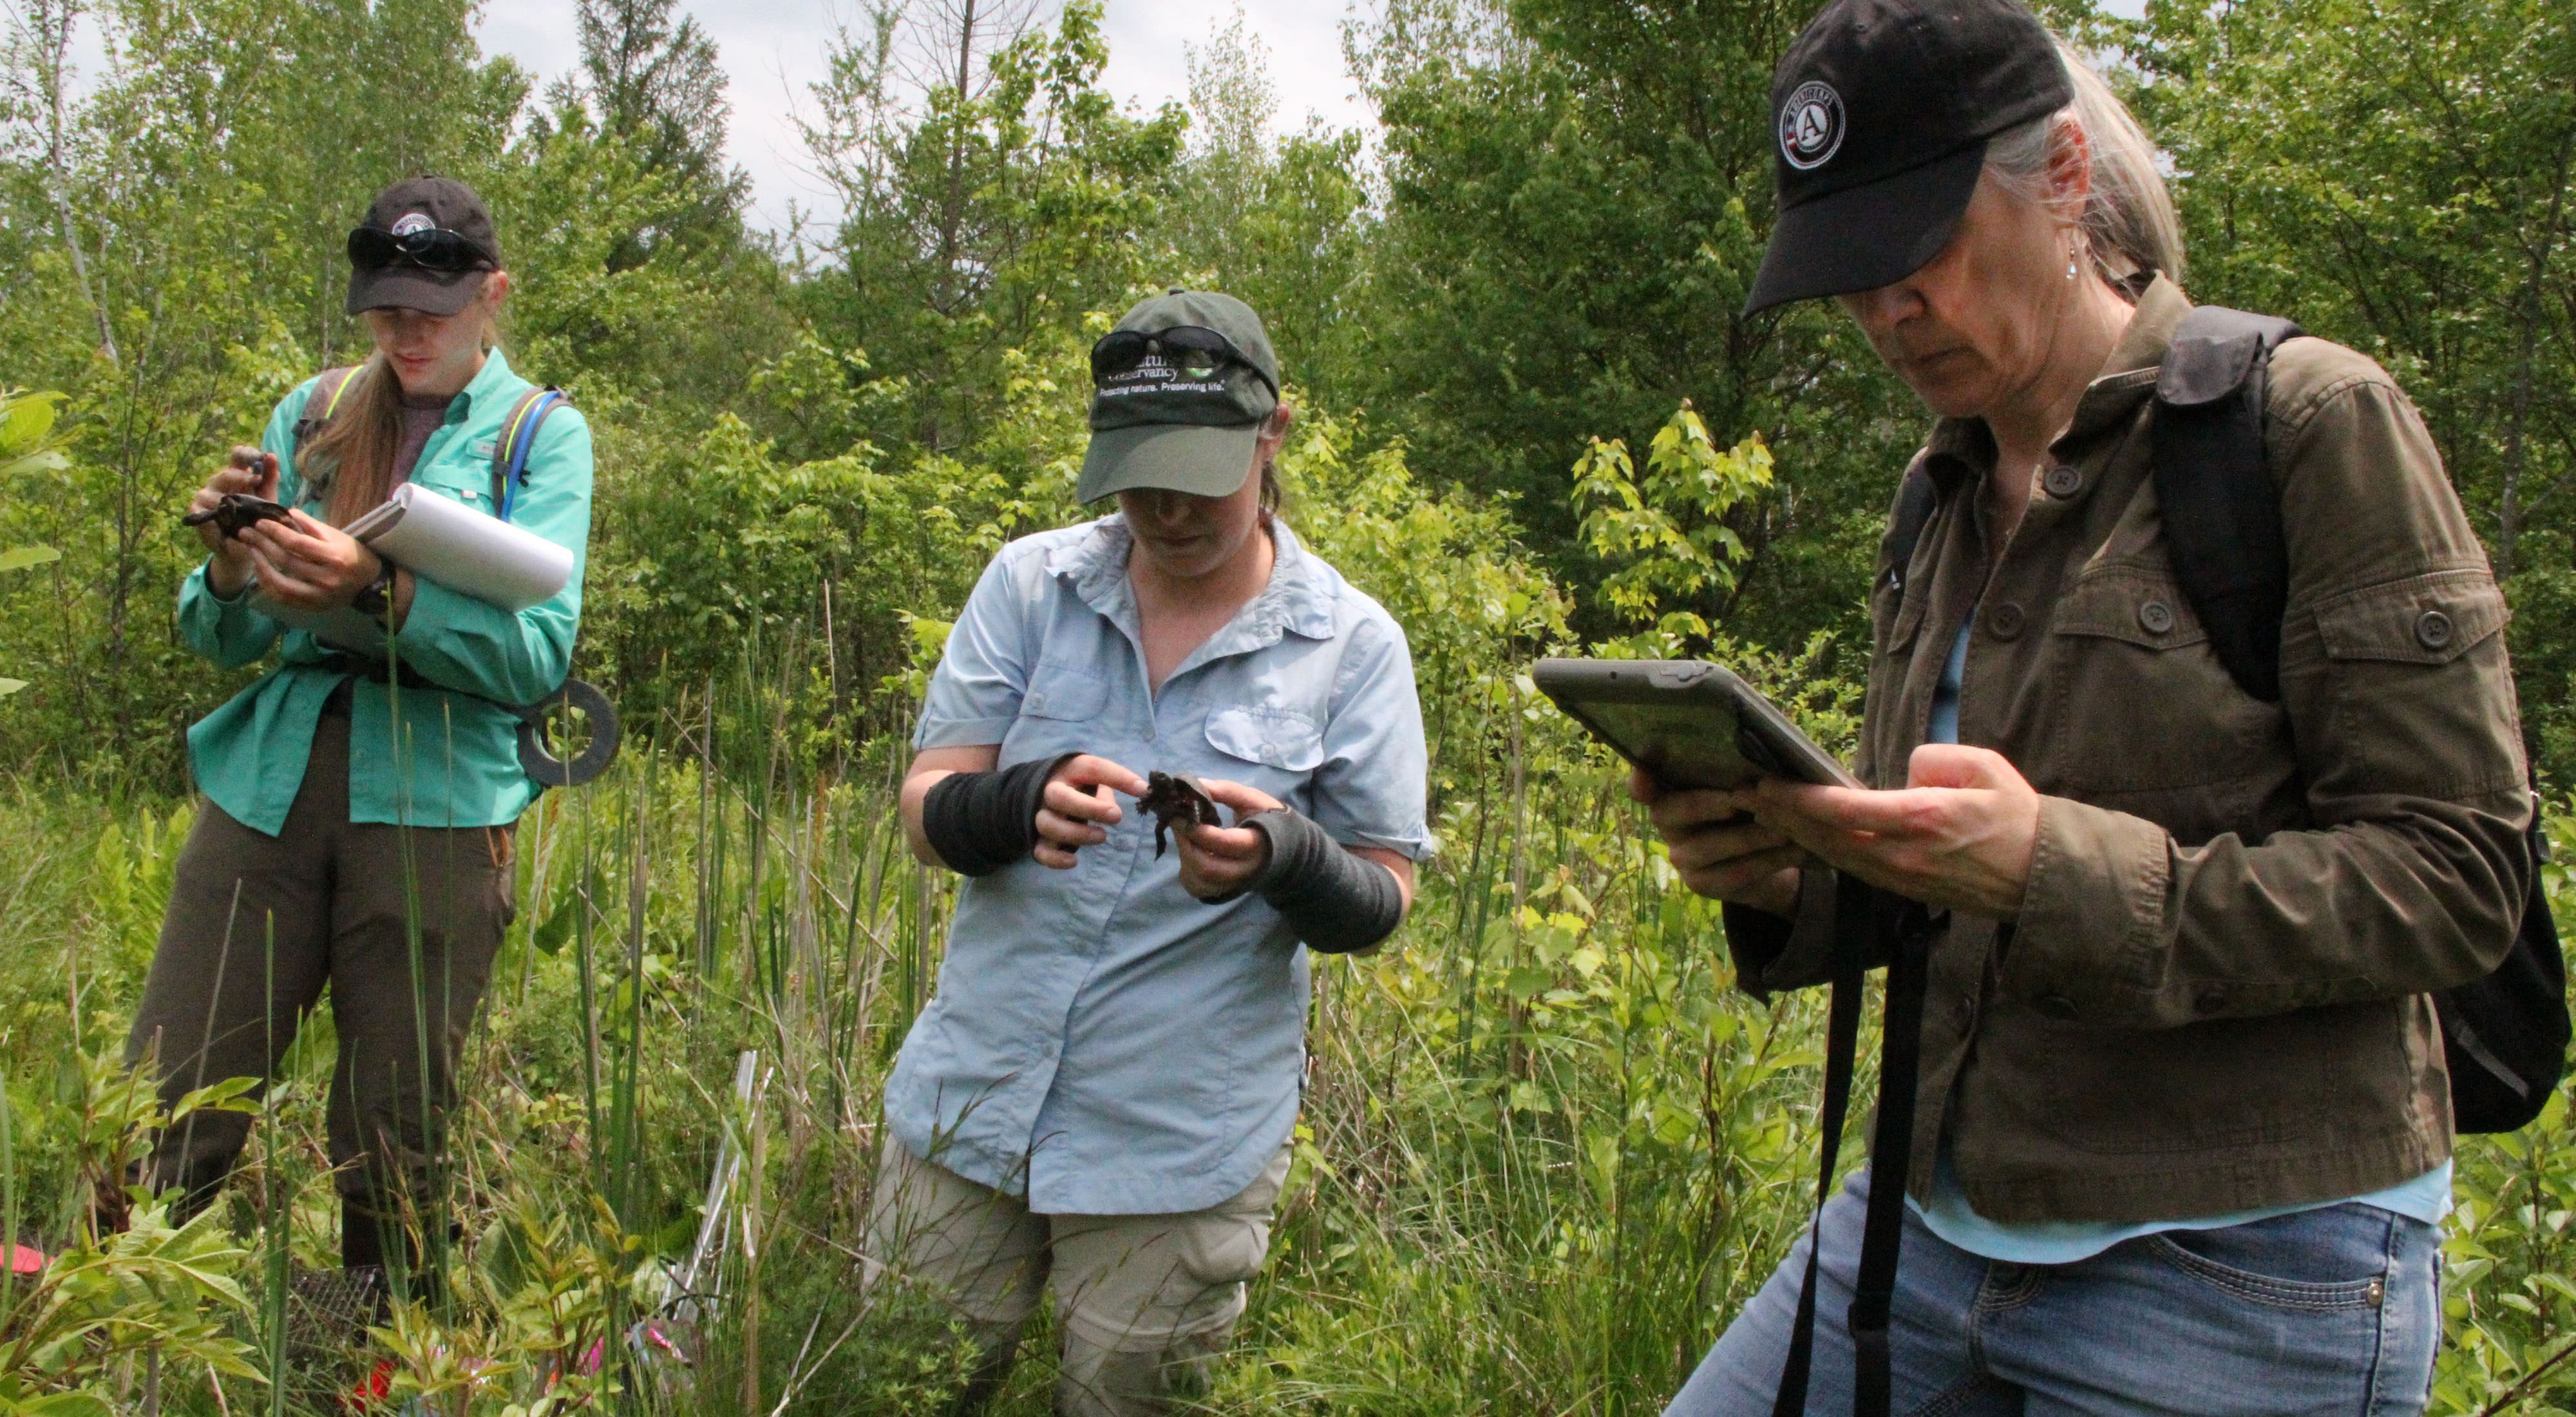 Three women stand in a lush green wetland, all wearing hats. Two are looking down at small turtles they are holding, the other is entering data into an iPad.